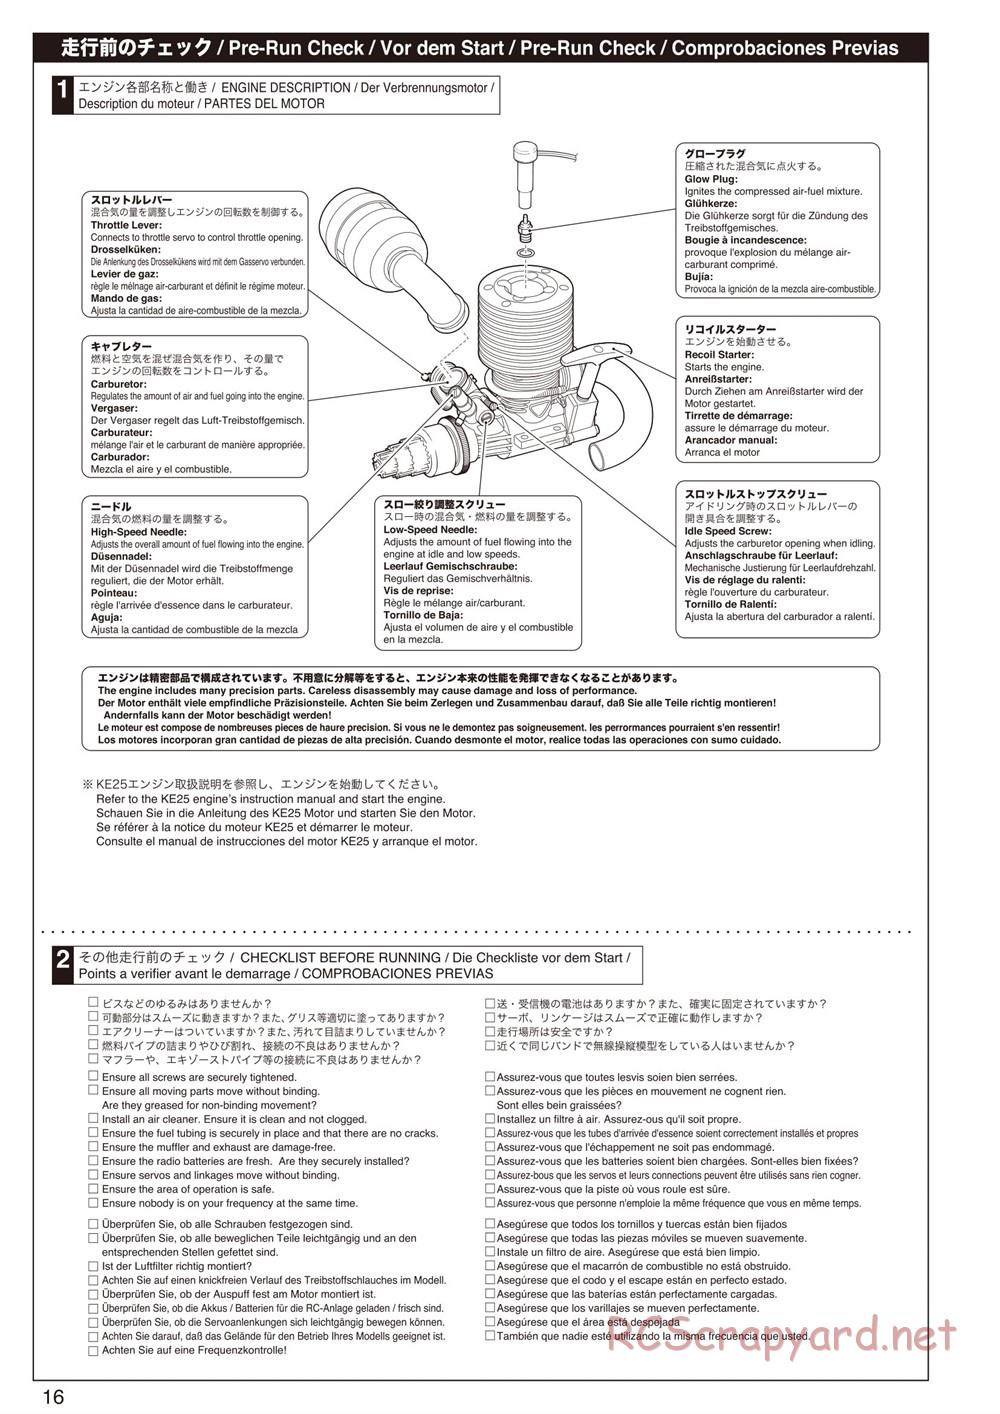 Kyosho - Mad Force Cruiser - Manual - Page 16